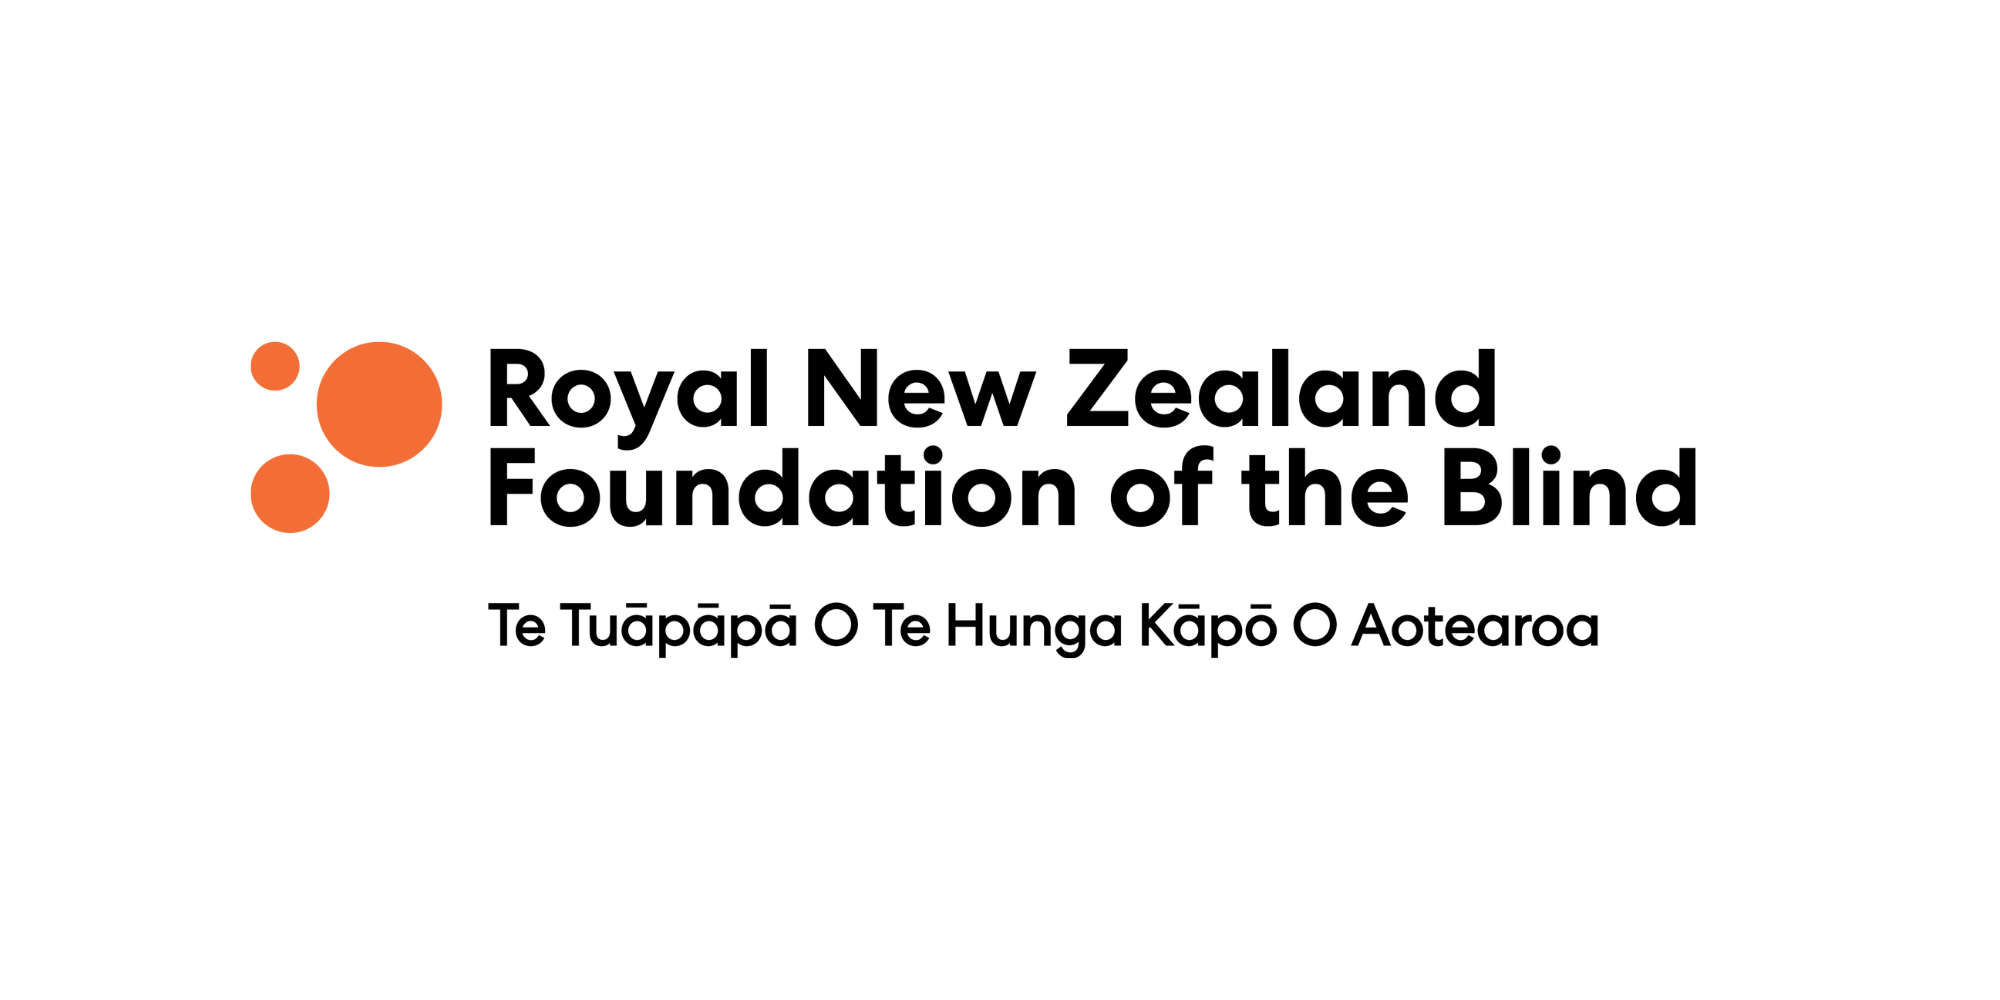 Royal New Zealand Foundation of the Blind